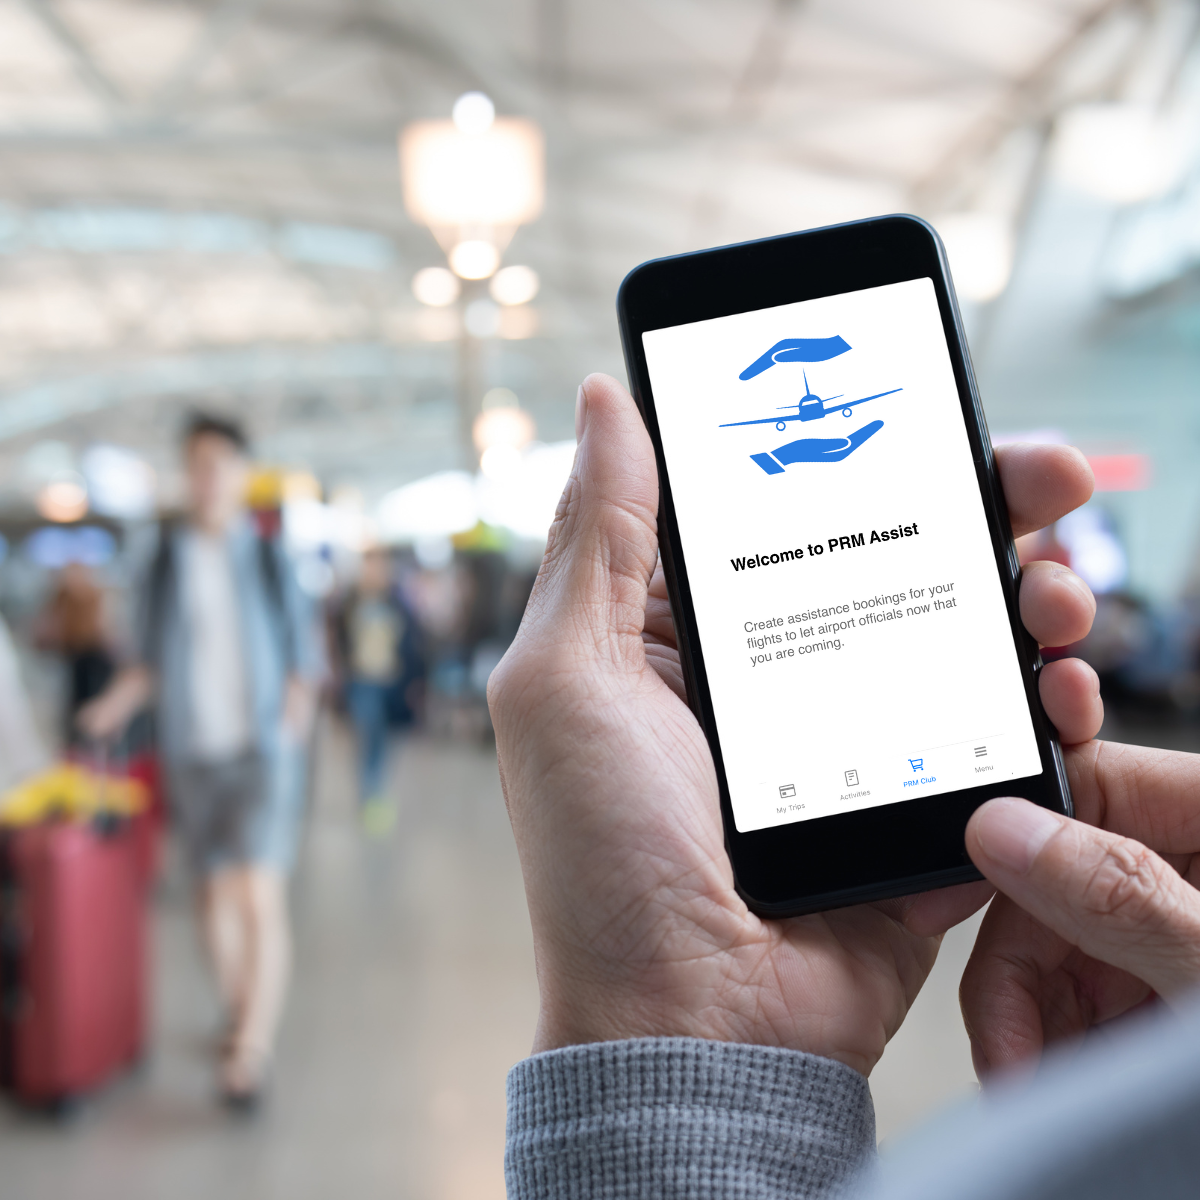 Special assistance passenger support app trialled at Glasgow Airport